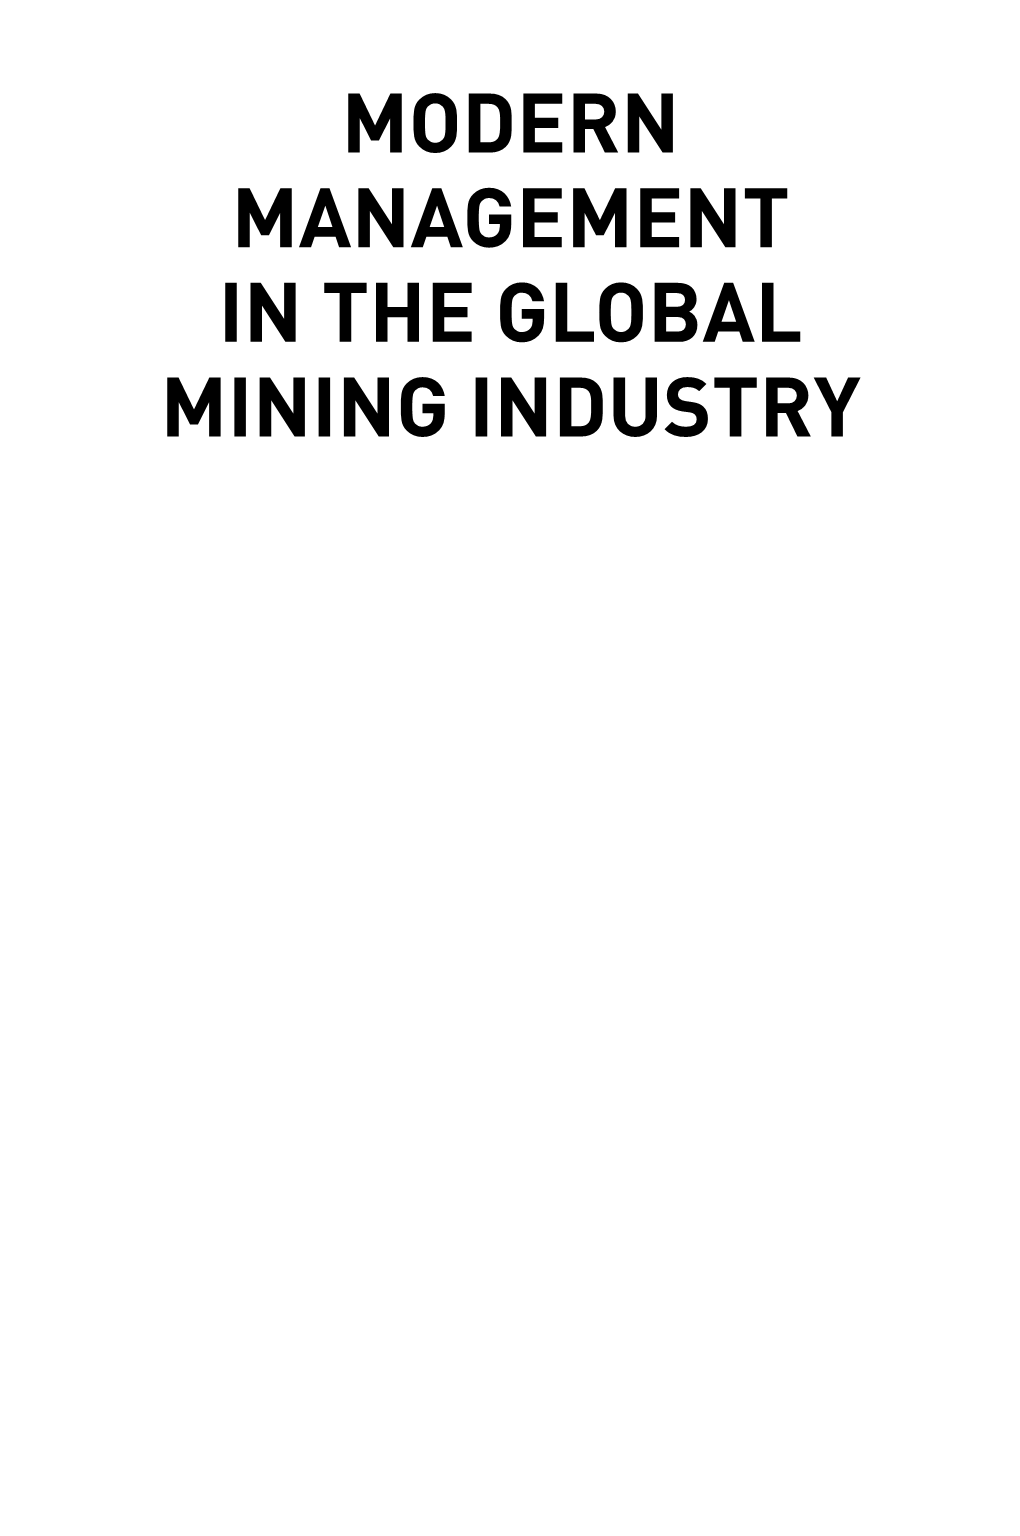 MODERN MANAGEMENT in the GLOBAL MINING INDUSTRY This Page Intentionally Left Blank MODERN MANAGEMENT in the GLOBAL MINING INDUSTRY